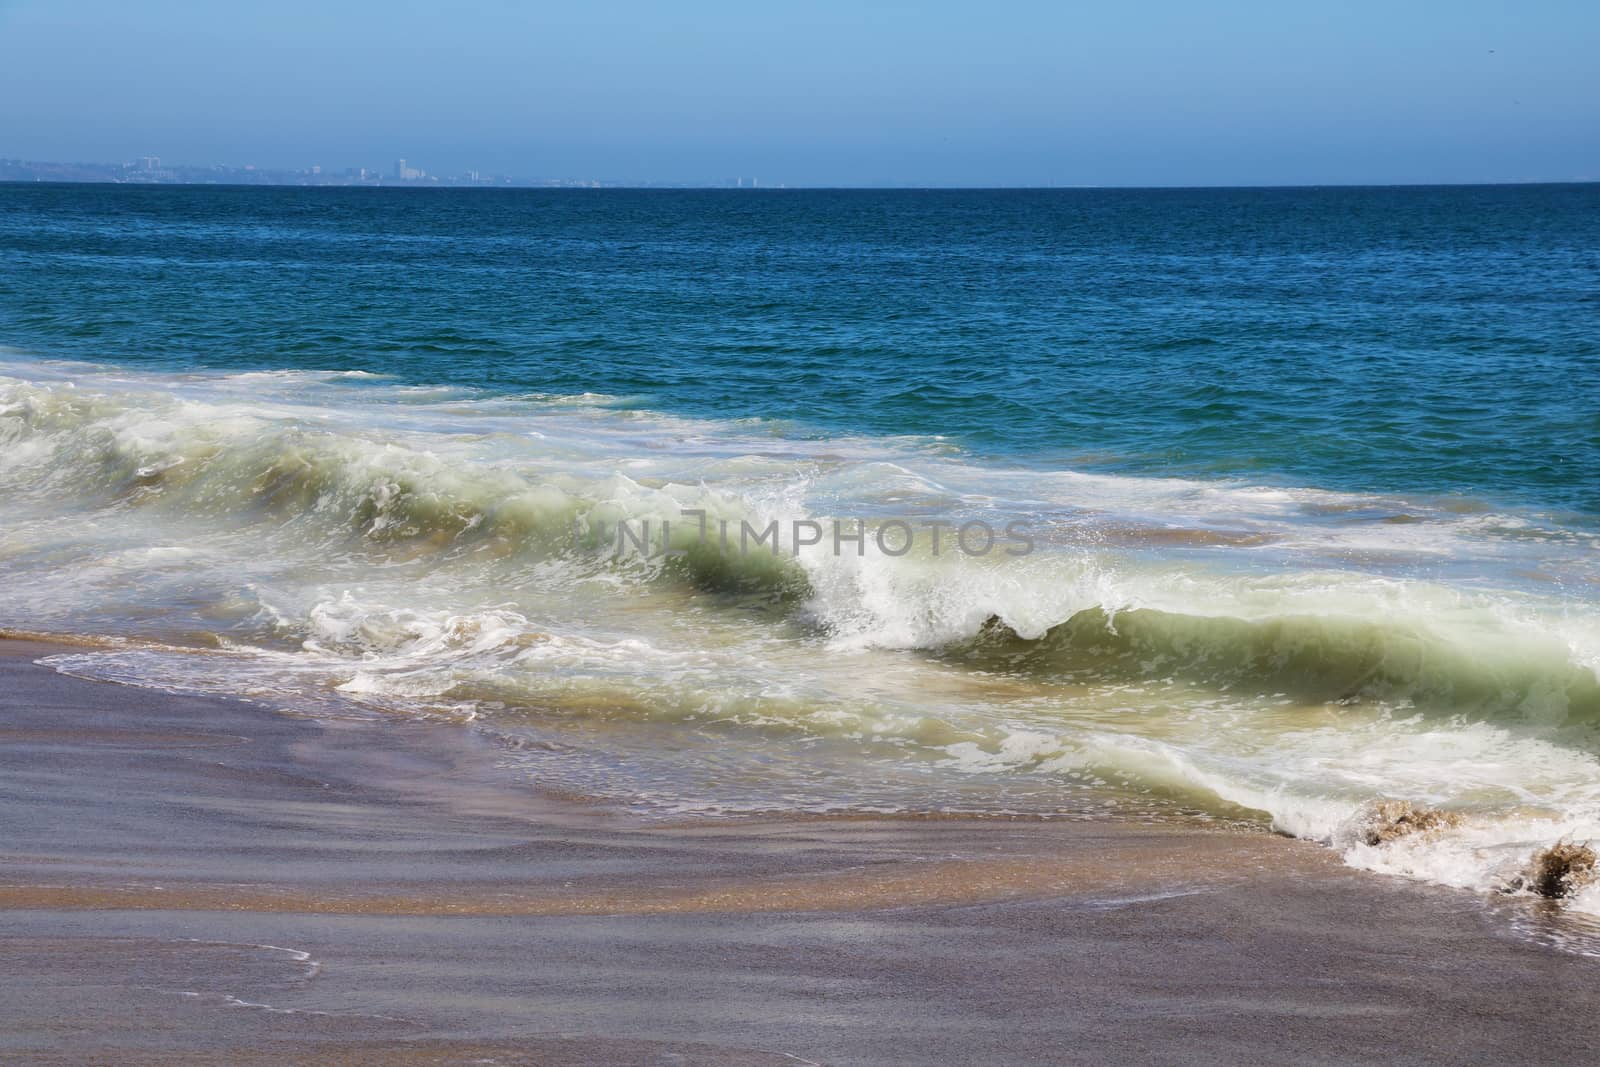 View of White Wave Receding on Perfect Sandy Beach